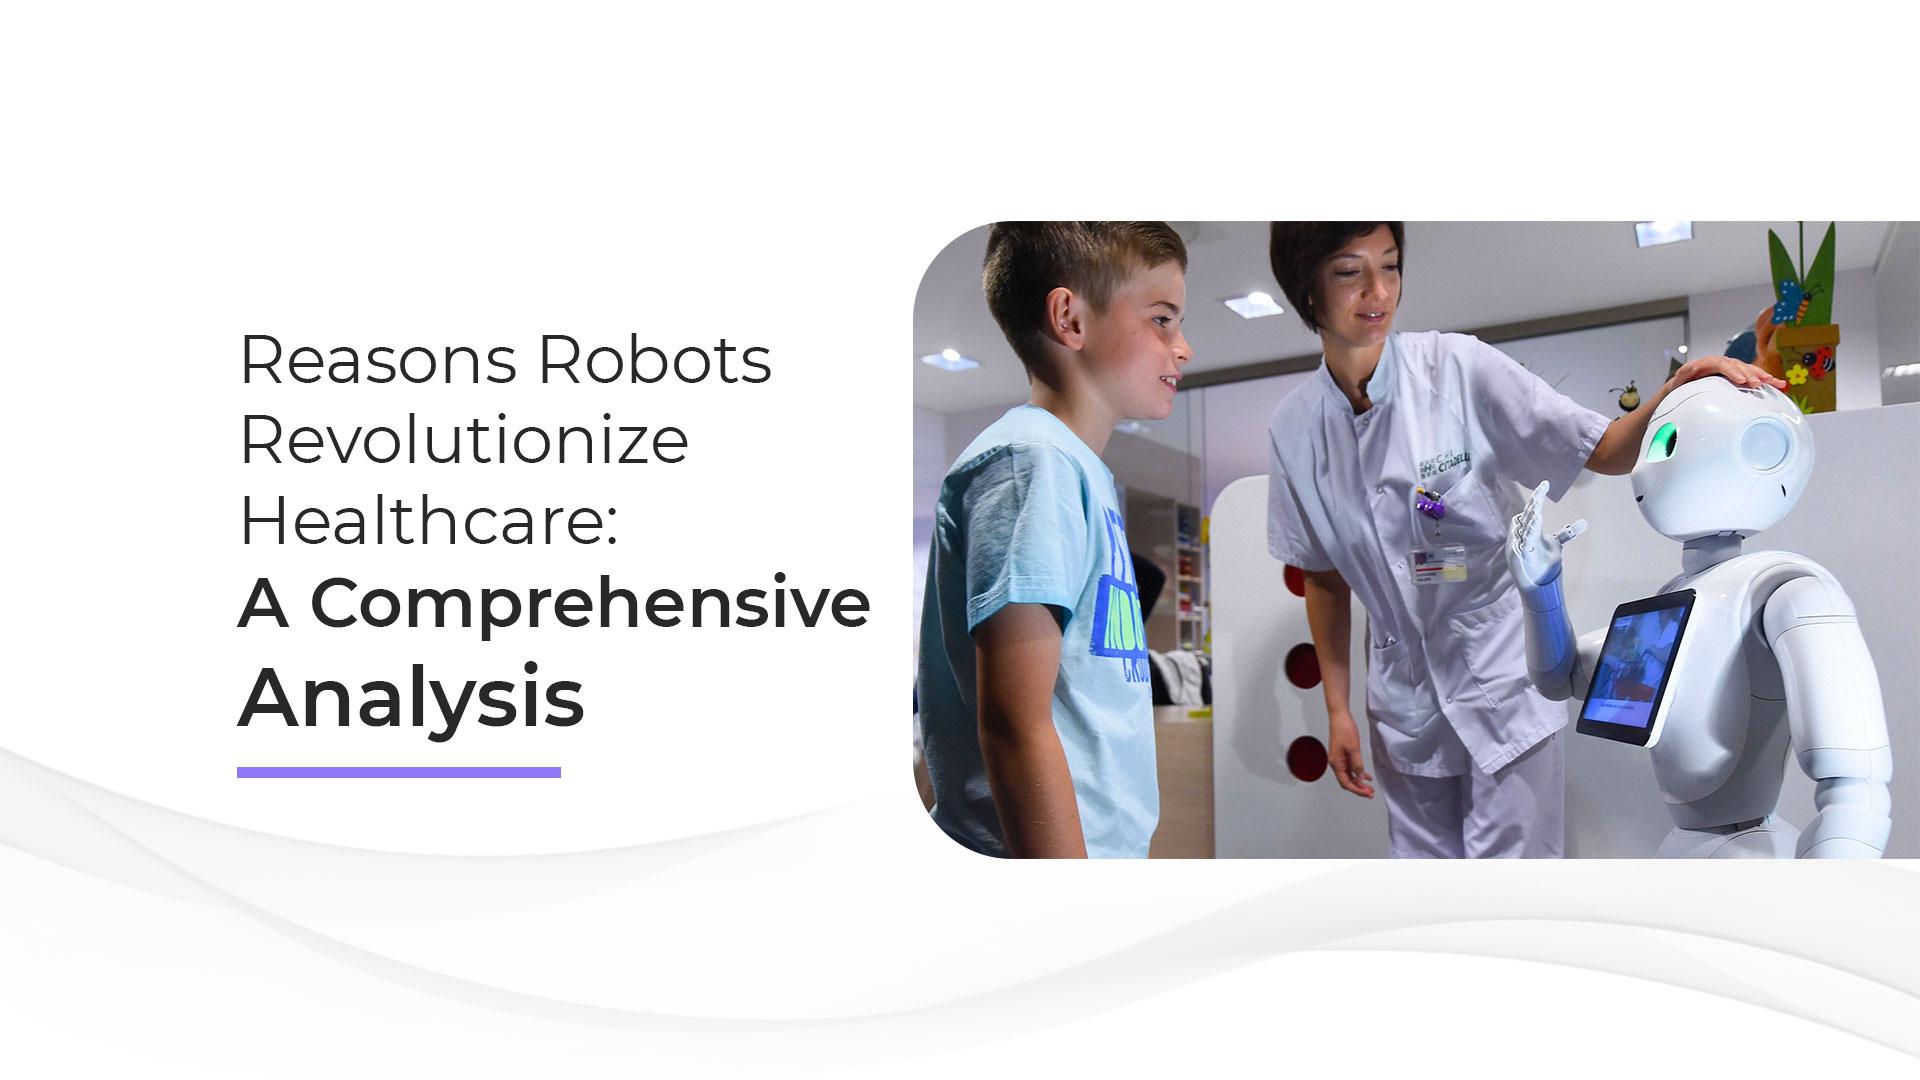 25 reasons why robots are used in healthcare